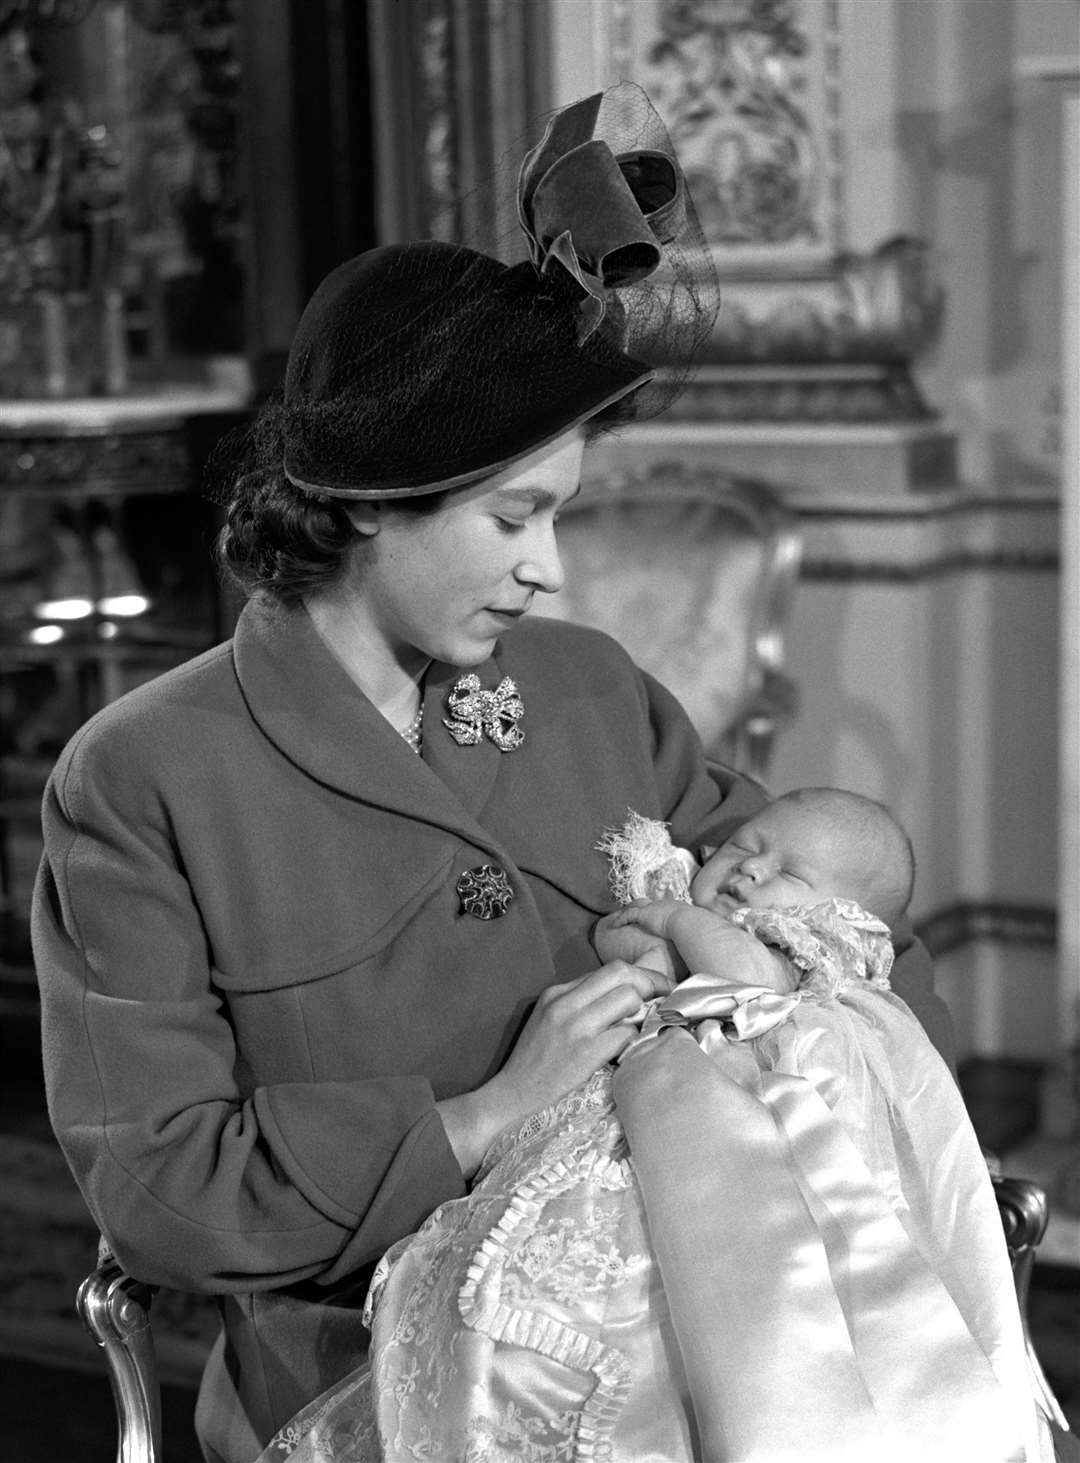 Princess Elizabeth (later Queen Elizabeth II) holding her son Prince Charles after his christening ceremony in Buckingham Palace.